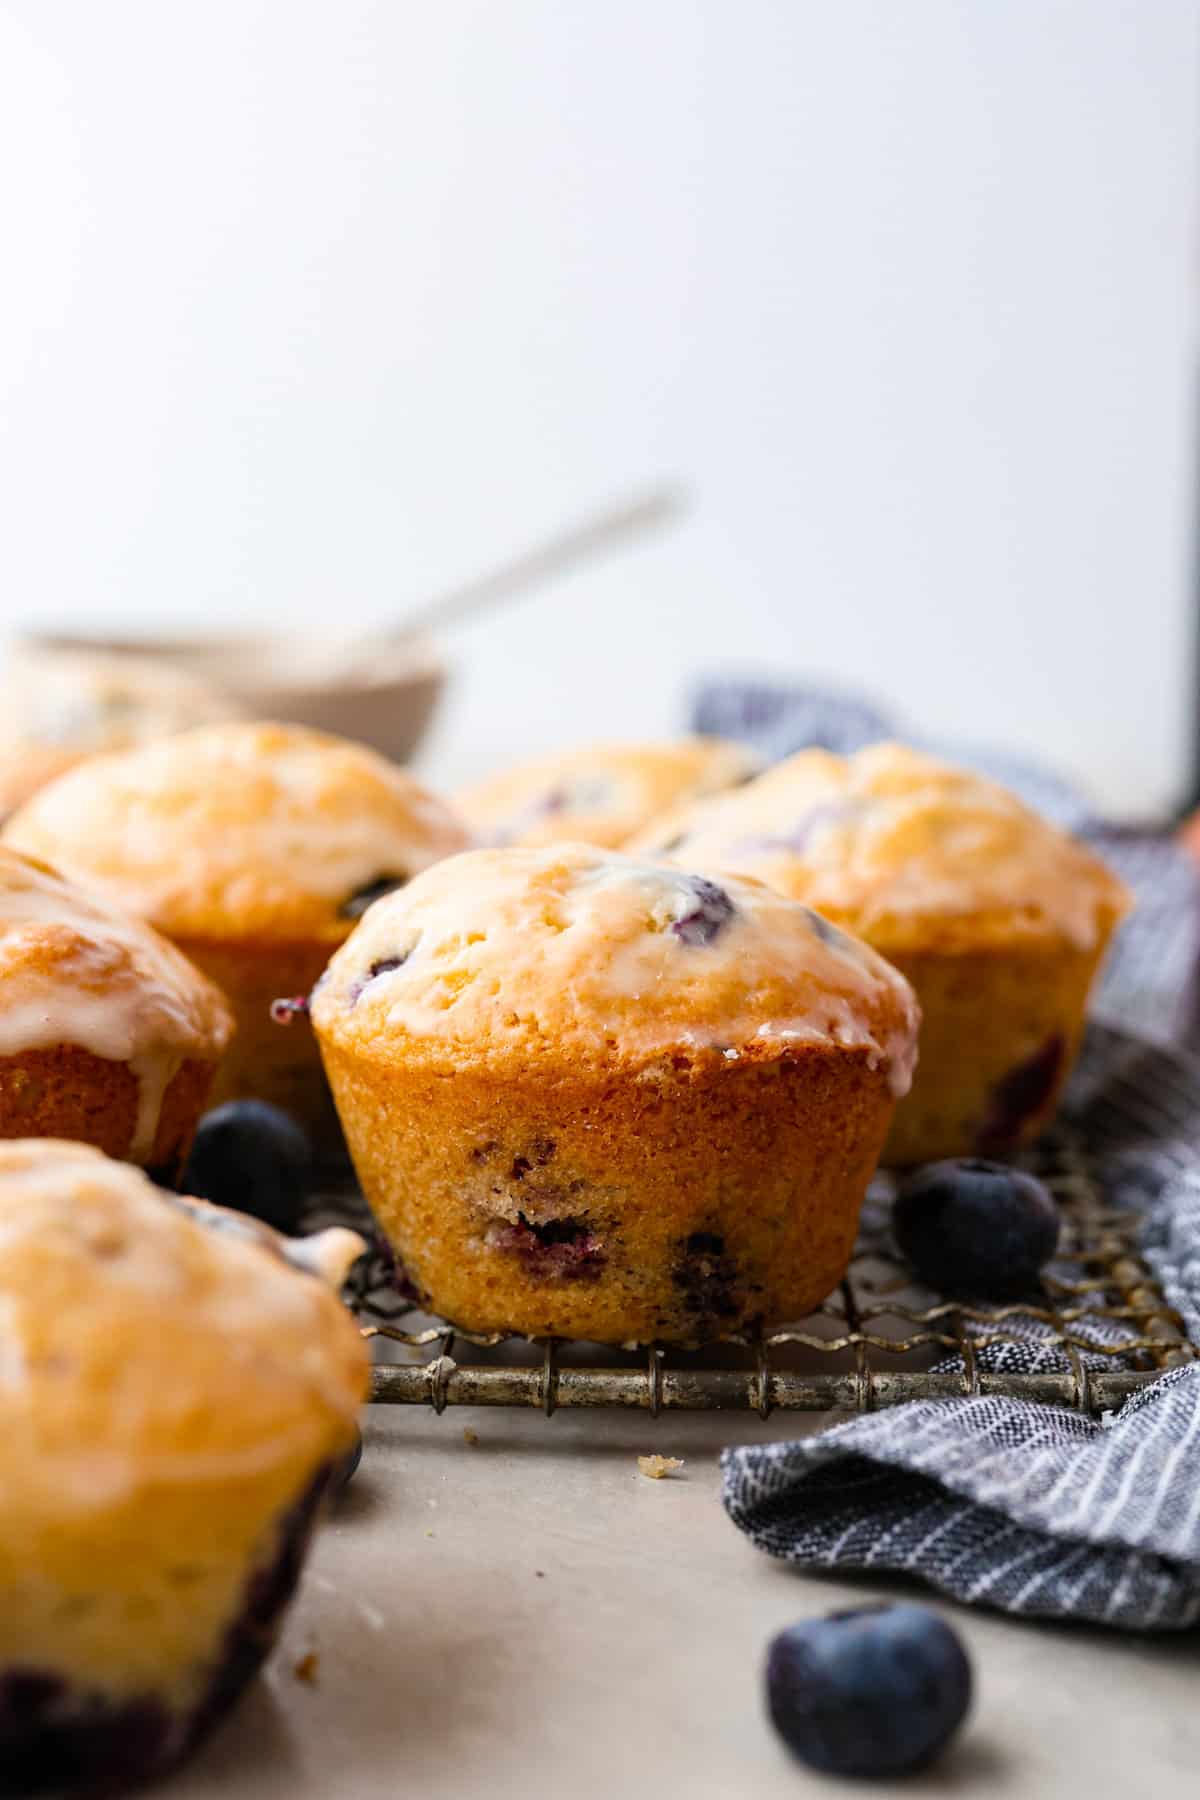 Learn how to bake muffins in a toaster oven and discover the best